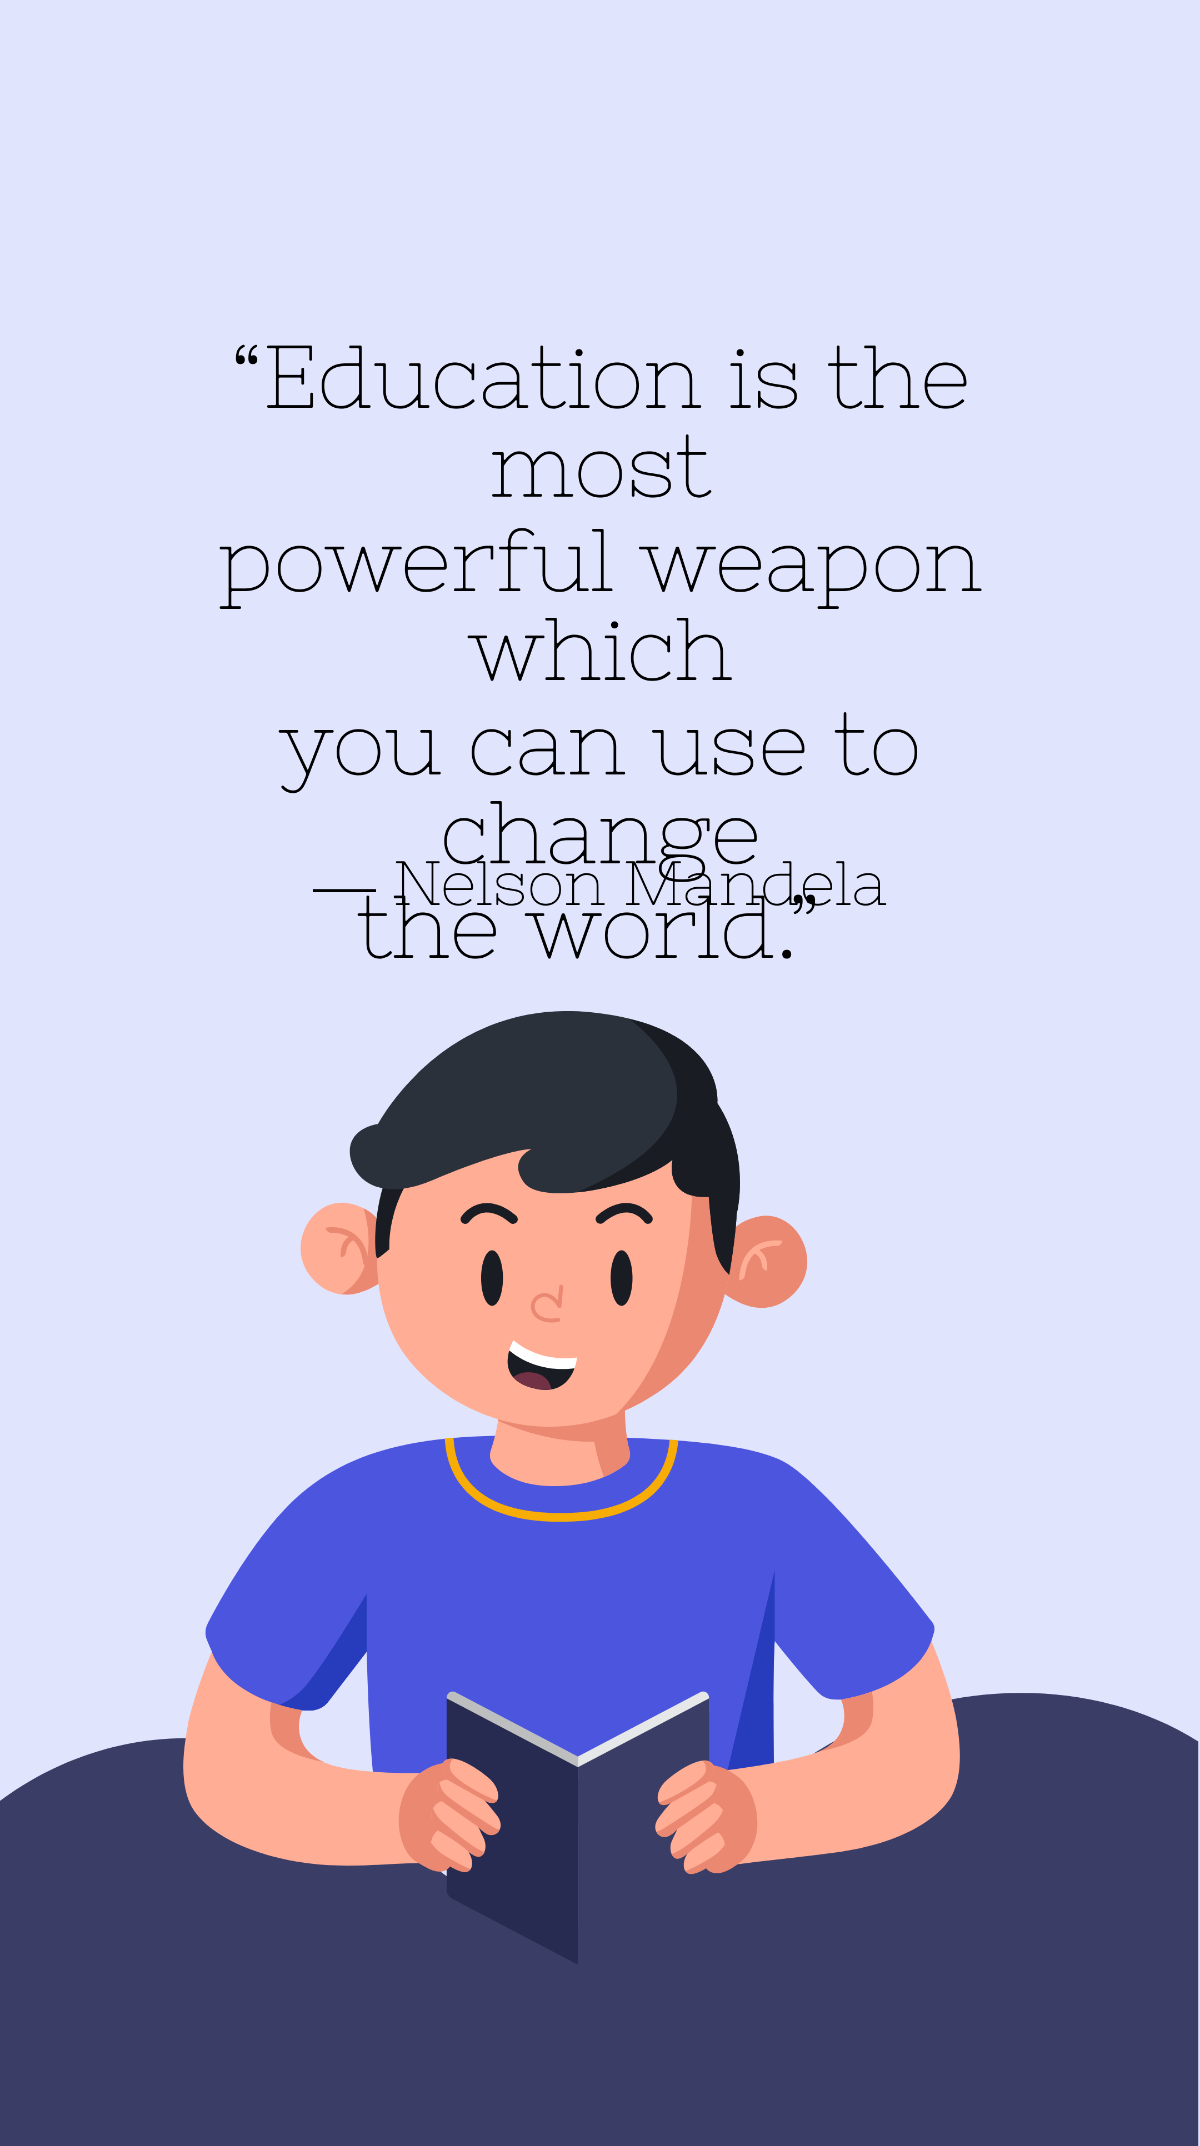 Free Nelson Mandela - Education is the most powerful weapon which you can use to change the world. Template